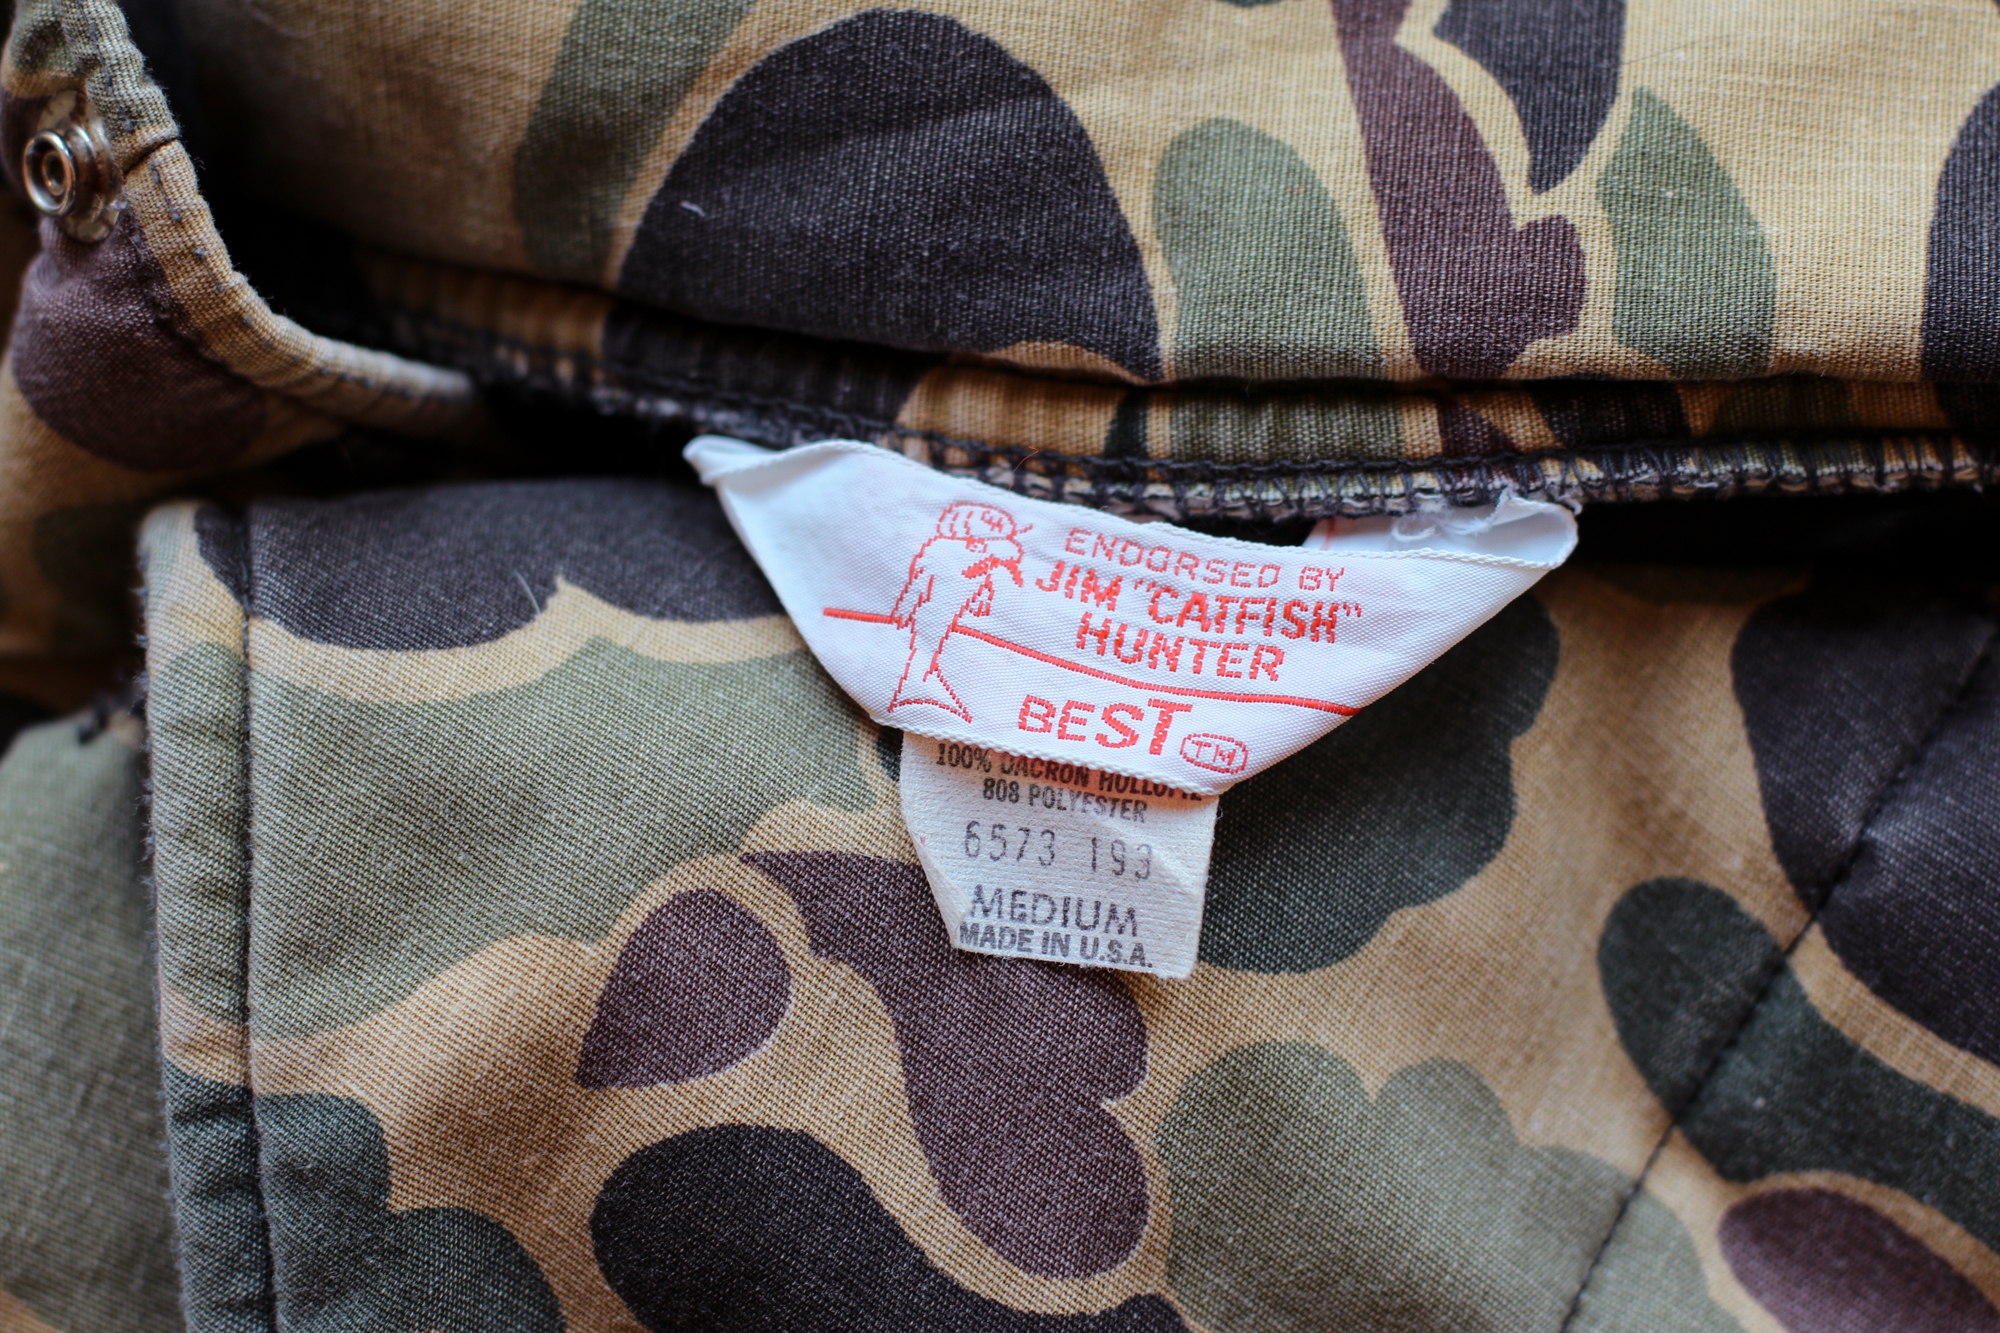 Vintage camo vest that was made in the USA.